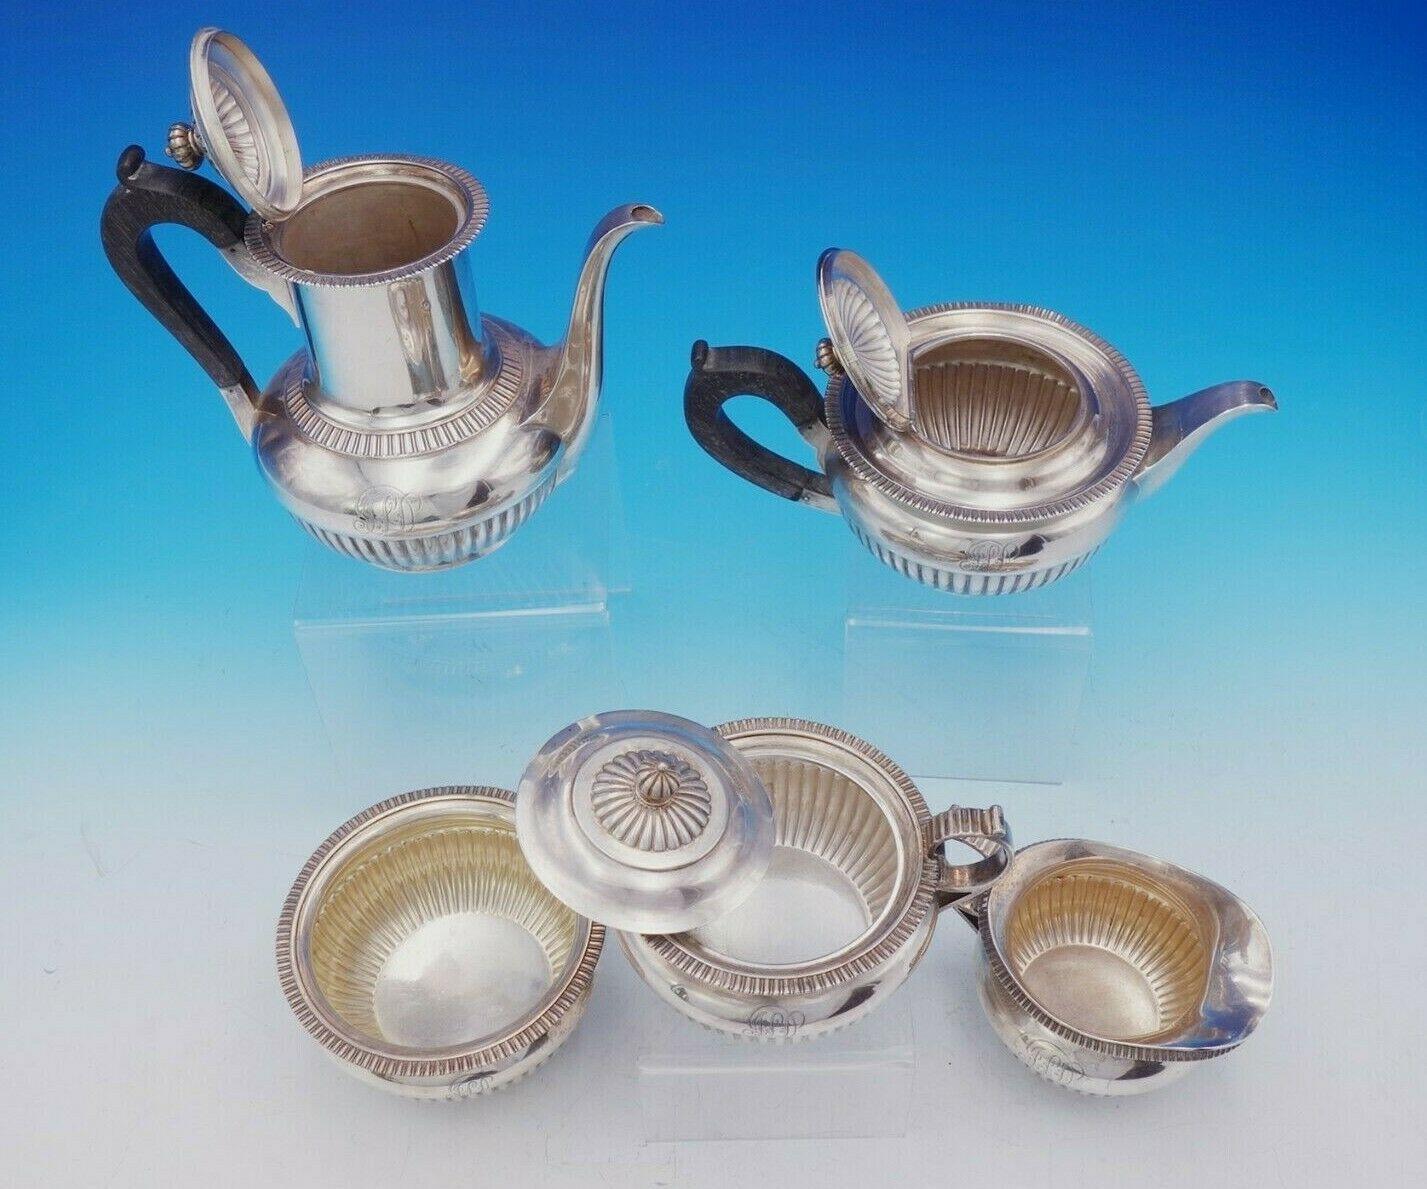 Dominick and Haff

Gorgeous Dominick and Haff sterling silver 5-piece tea set marked #134. It features carved wood handles and fluted design. It also has a date mark for 1884 and was retailed by Shreve. This set includes:

1 - Tea pot: Measures 9